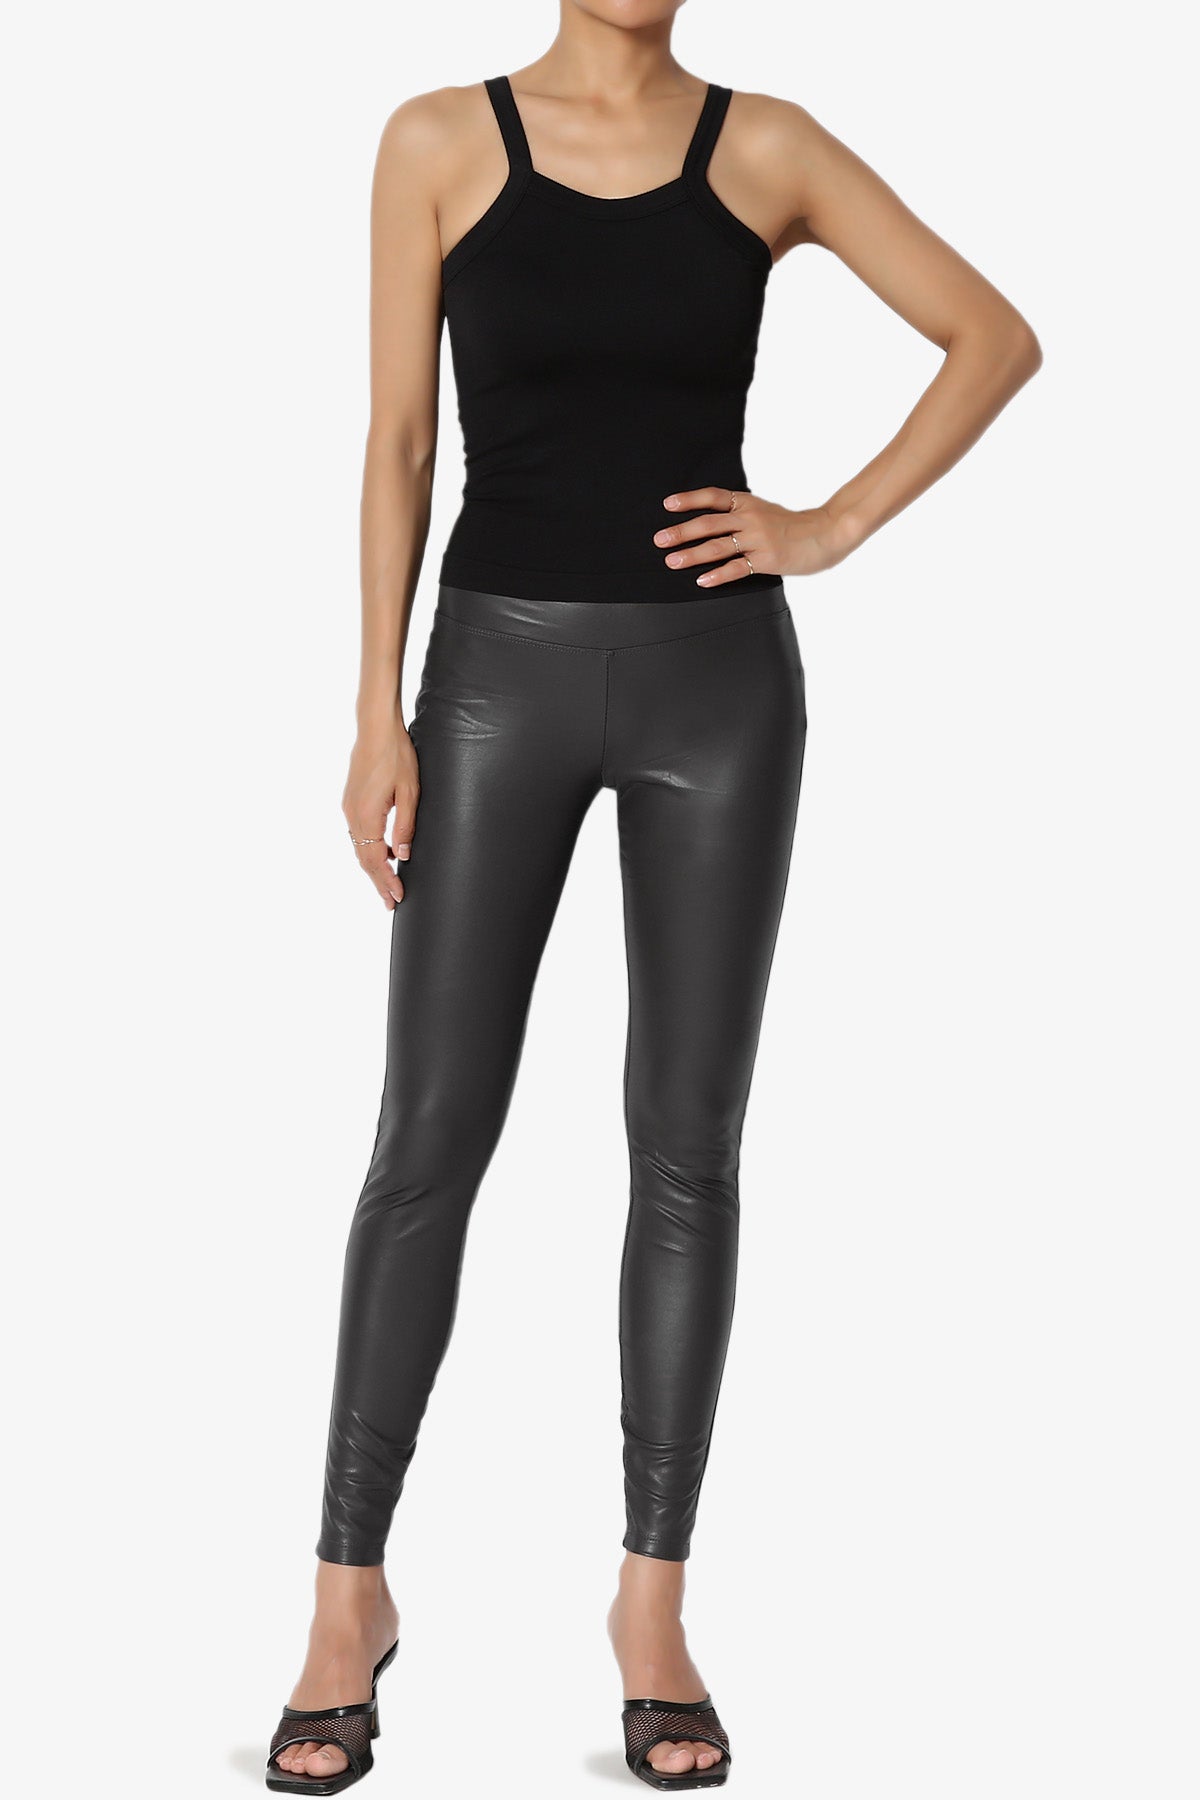 RESTOCK Faux Leather Leggings with Yoga Waist Band – Dixieland